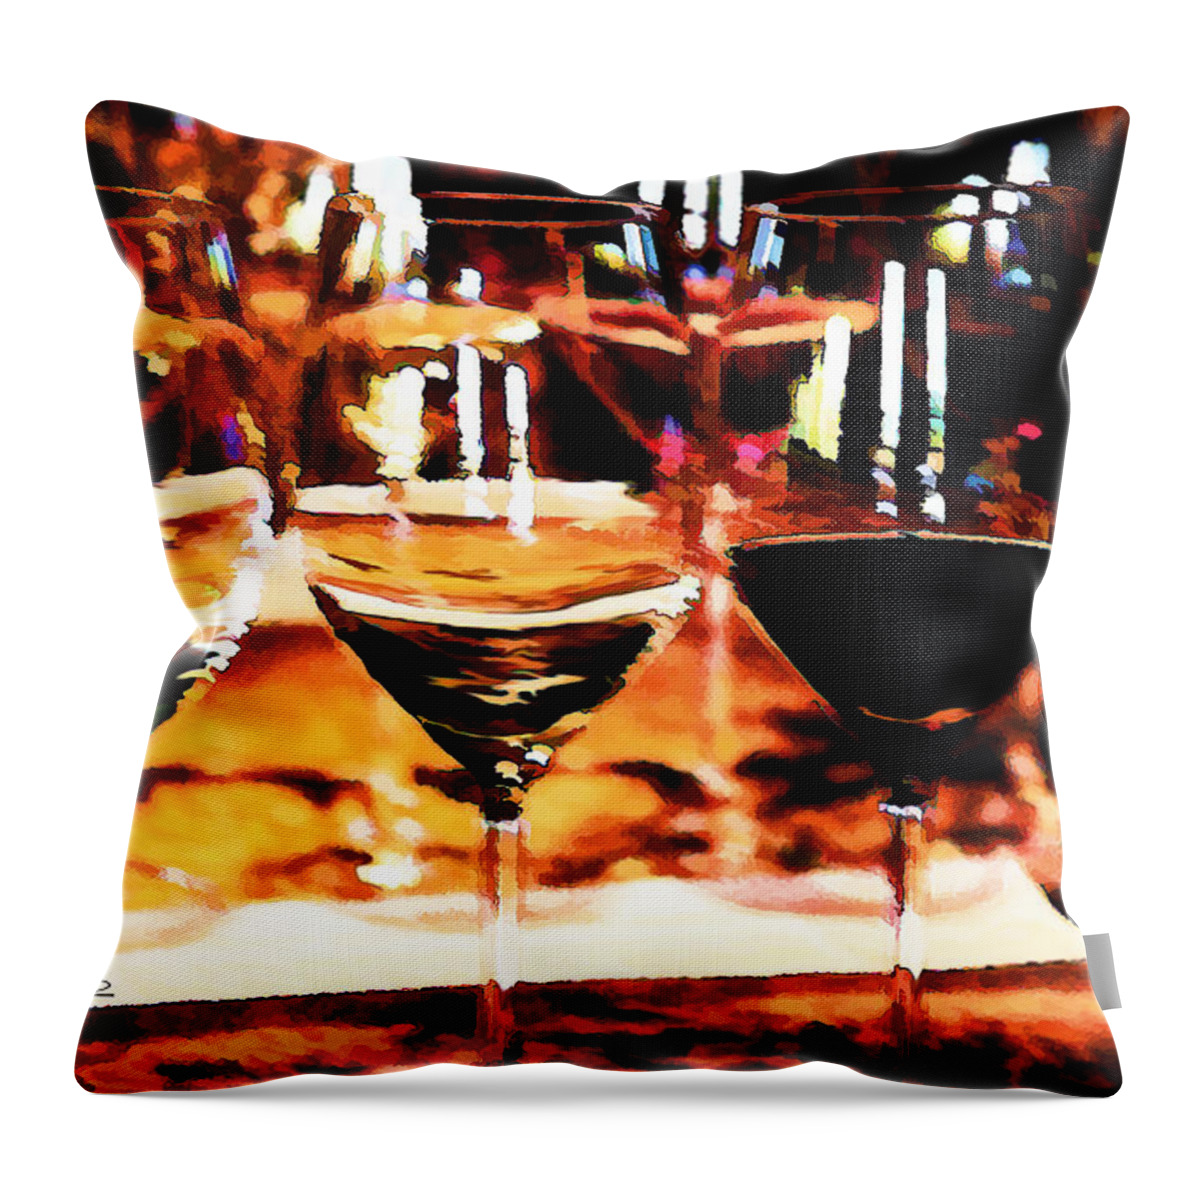 Wine Throw Pillow featuring the digital art The Toast by Marti Green